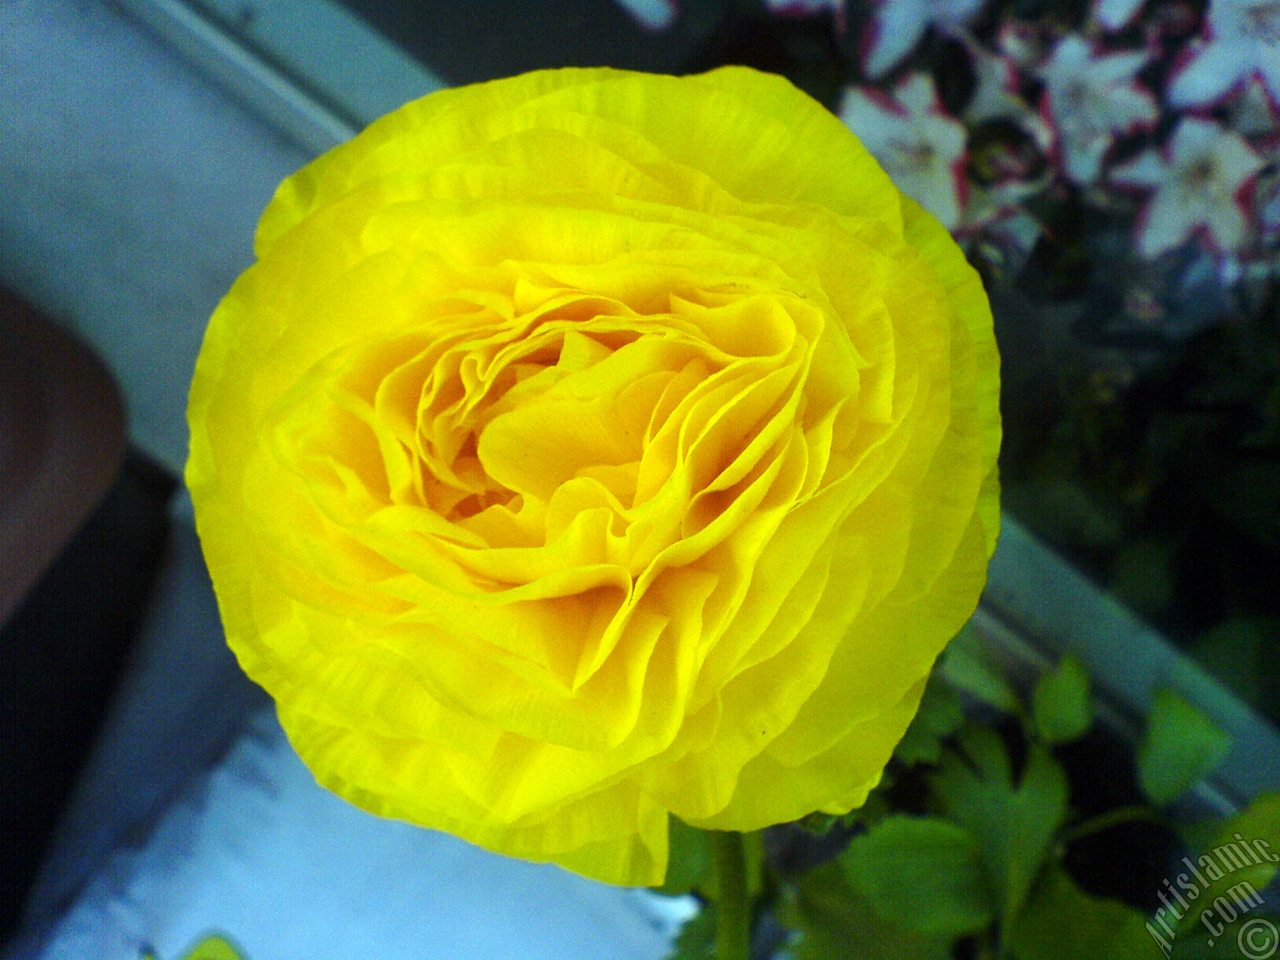 A yellow flower in the pot.
